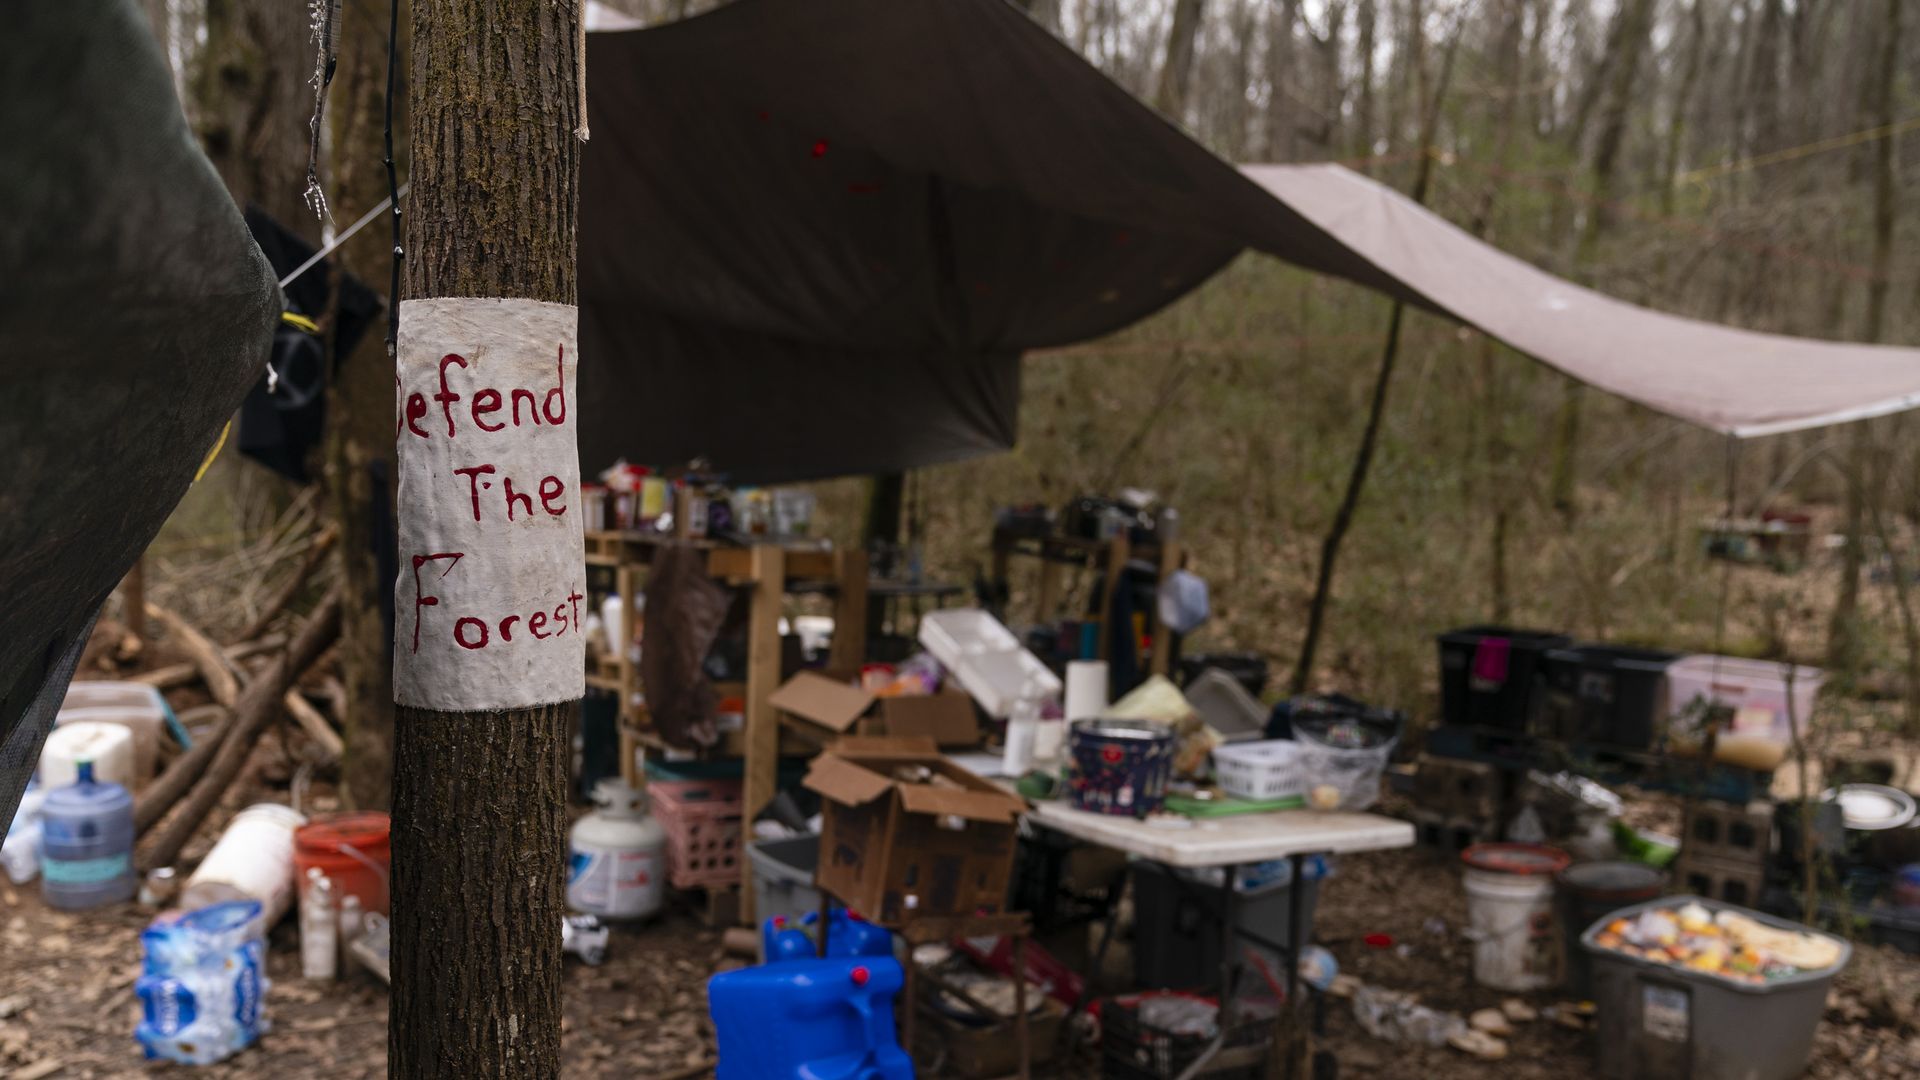 A photo of abandoned campsite under a tarp in the woods occupied by activists opposed to a public safety training center and a tree with a note that says "Defend the forest"